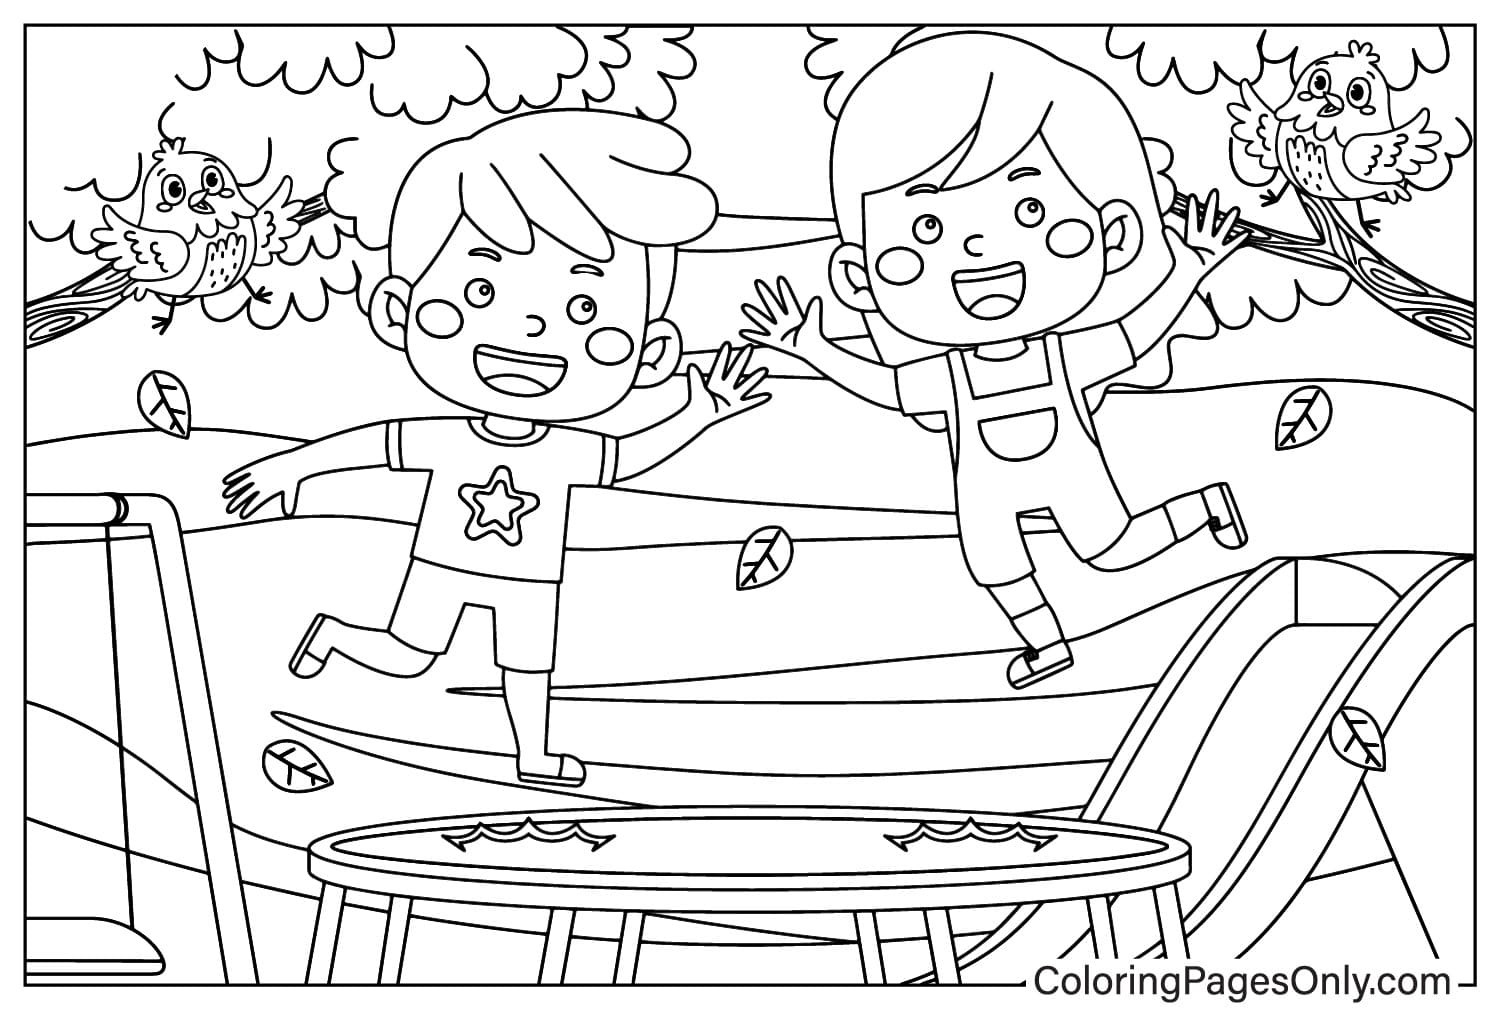 Playground Coloring Page JPG from Playground